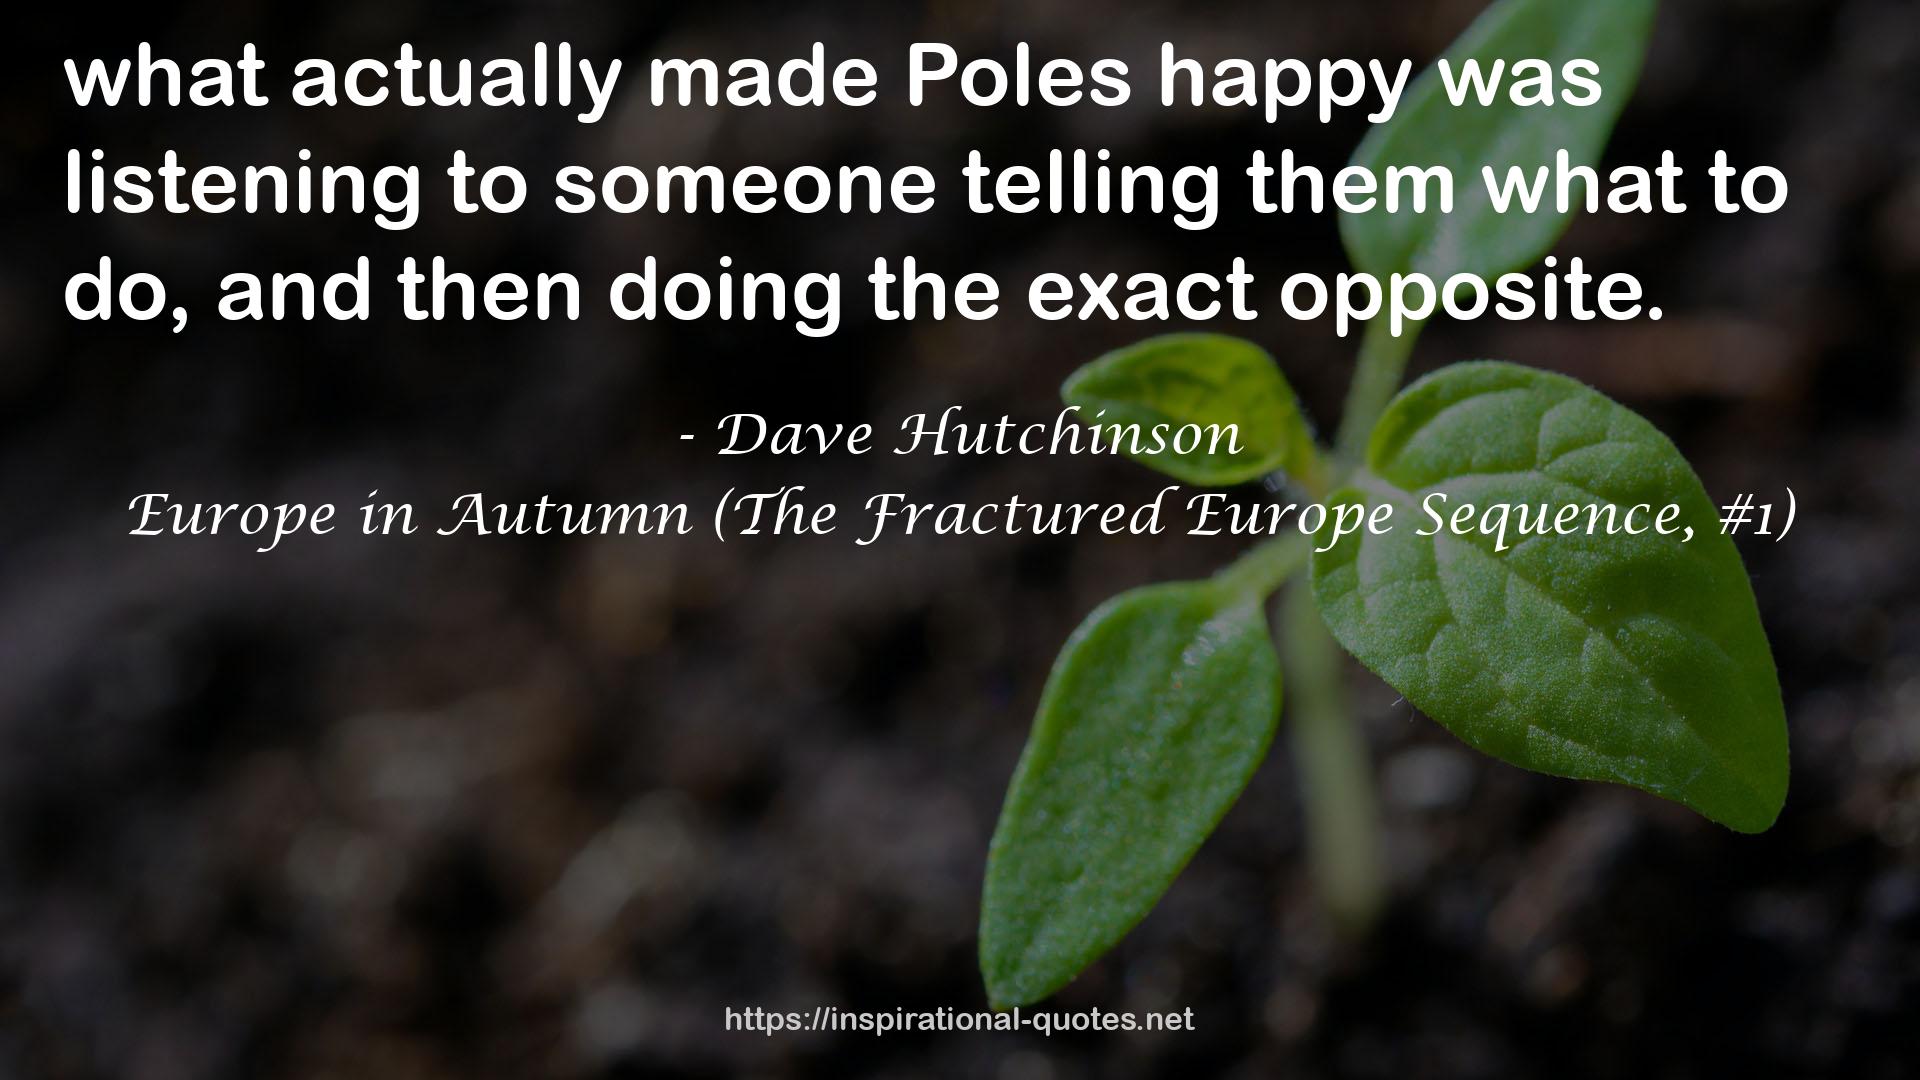 Europe in Autumn (The Fractured Europe Sequence, #1) QUOTES